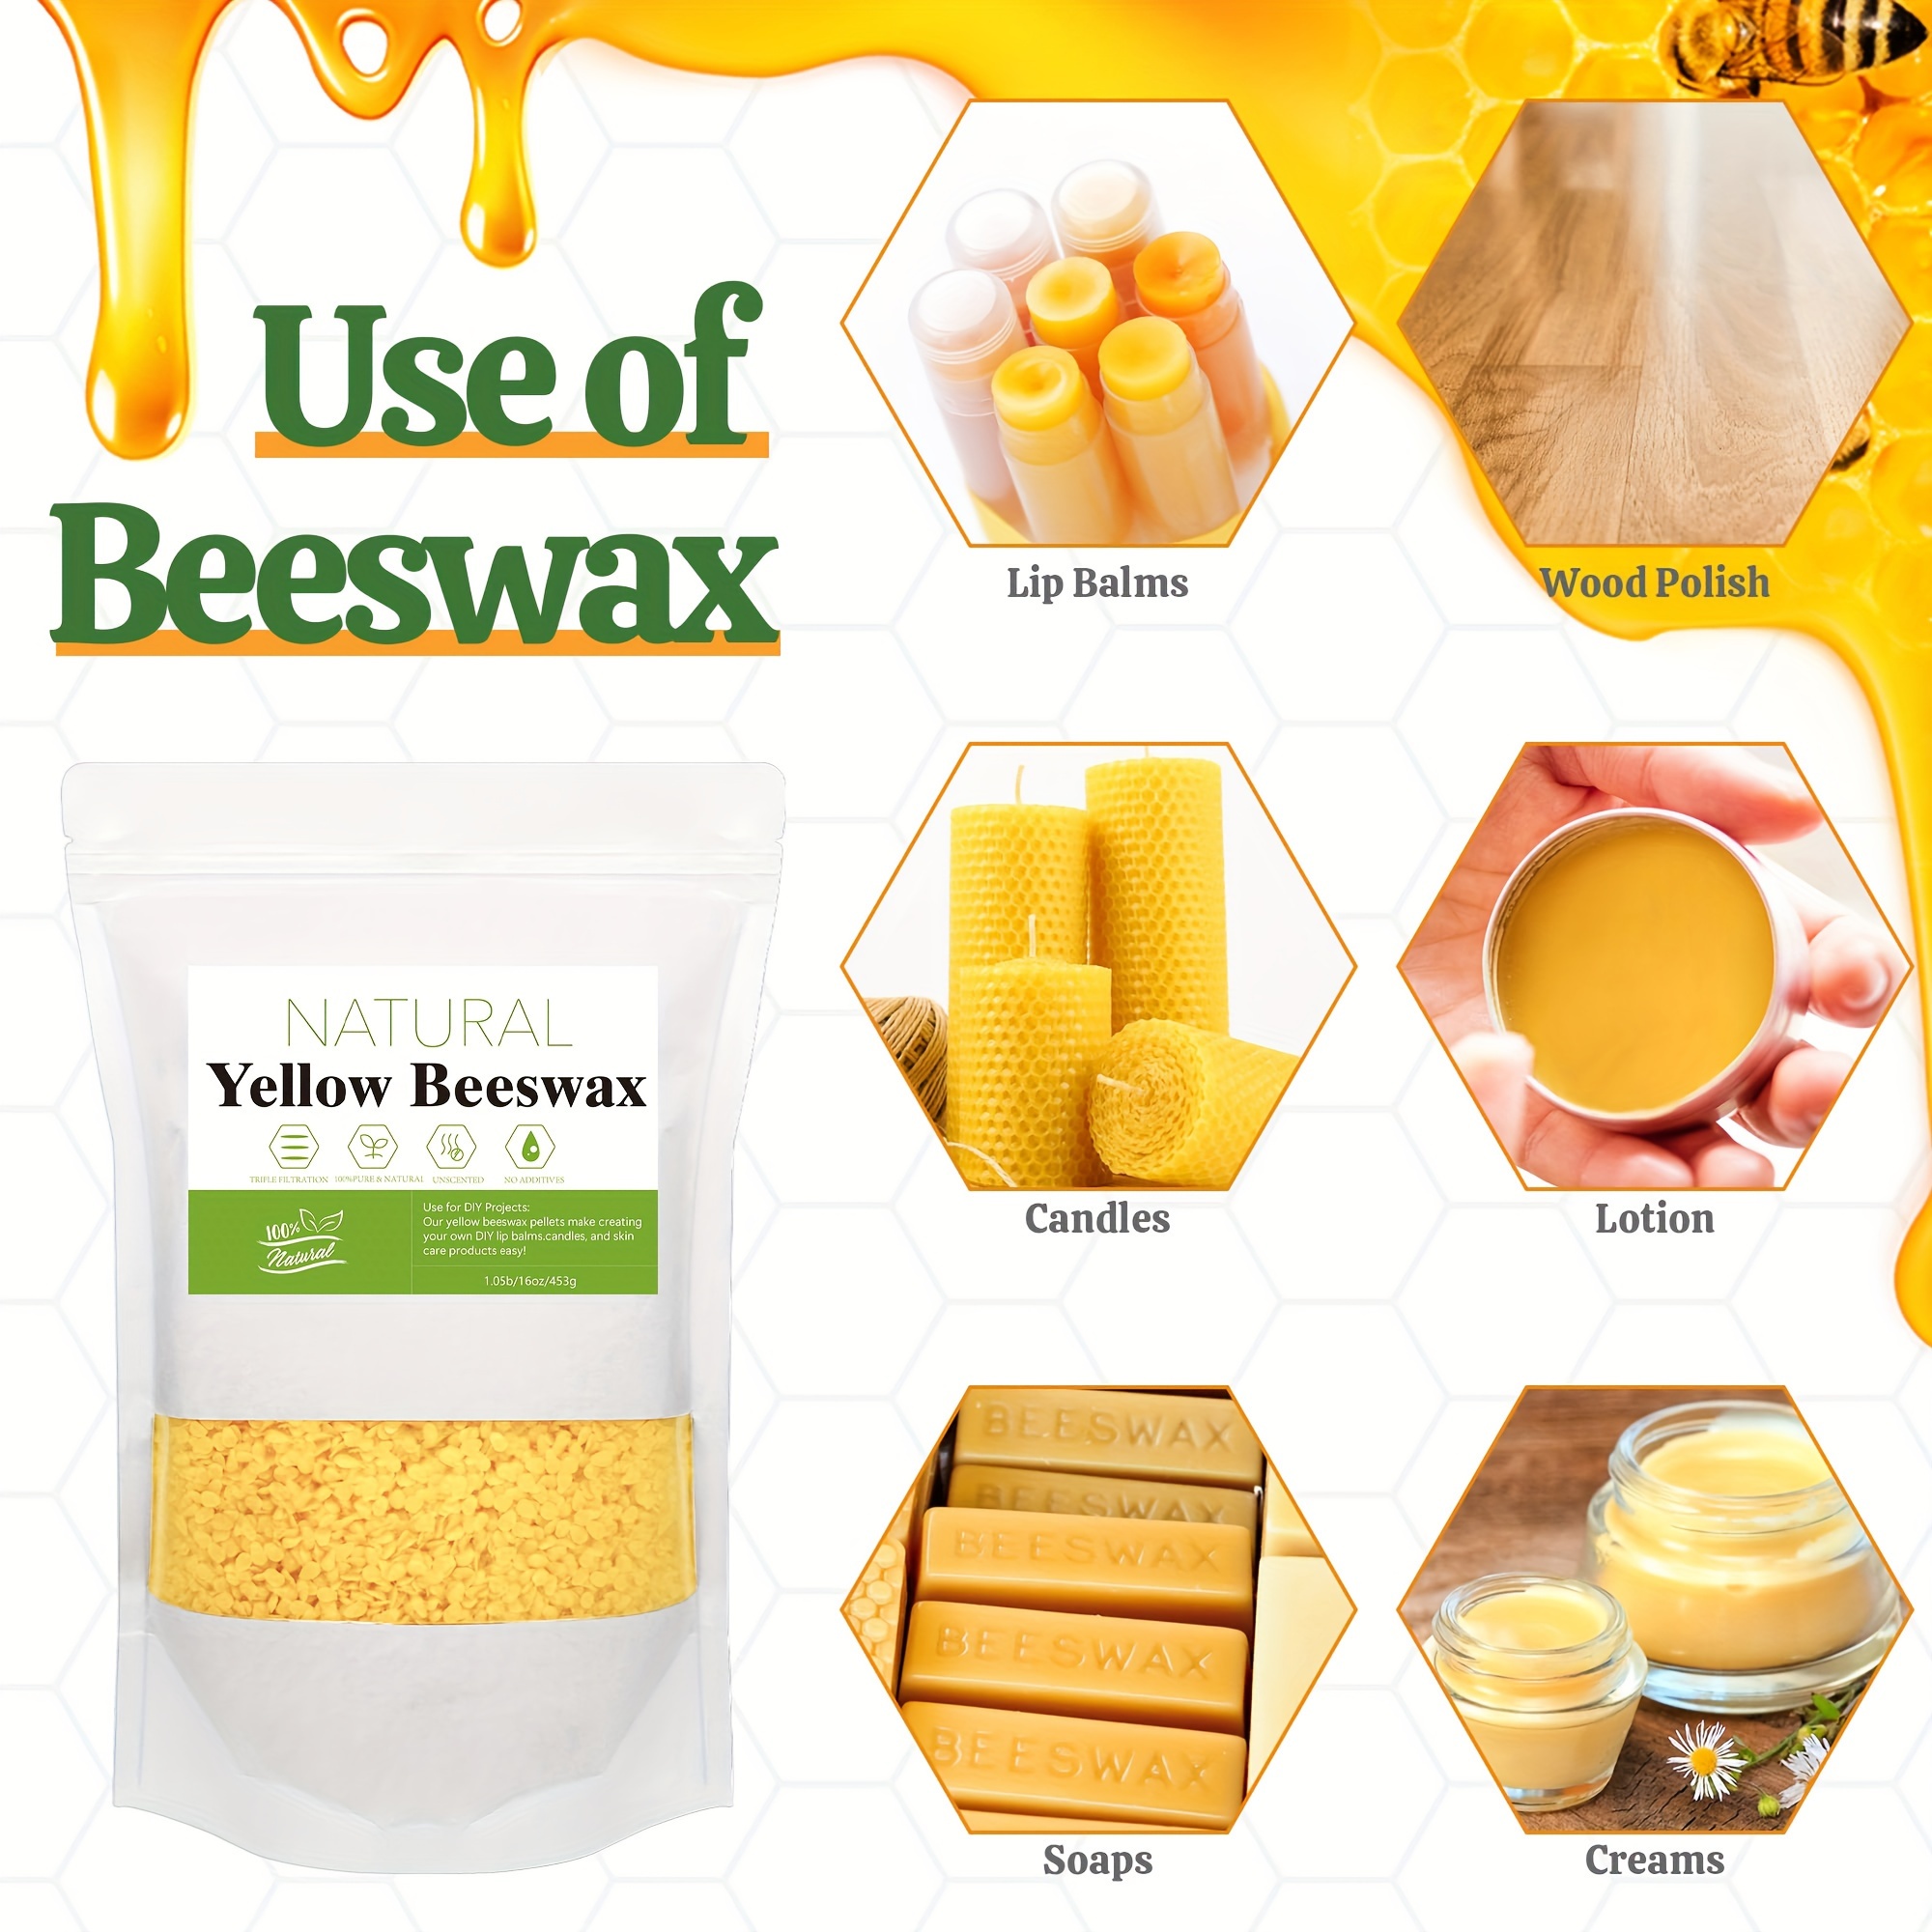 2 4 8 15 oz Pure Natural Yellow Beeswax Pellets Pastilles for